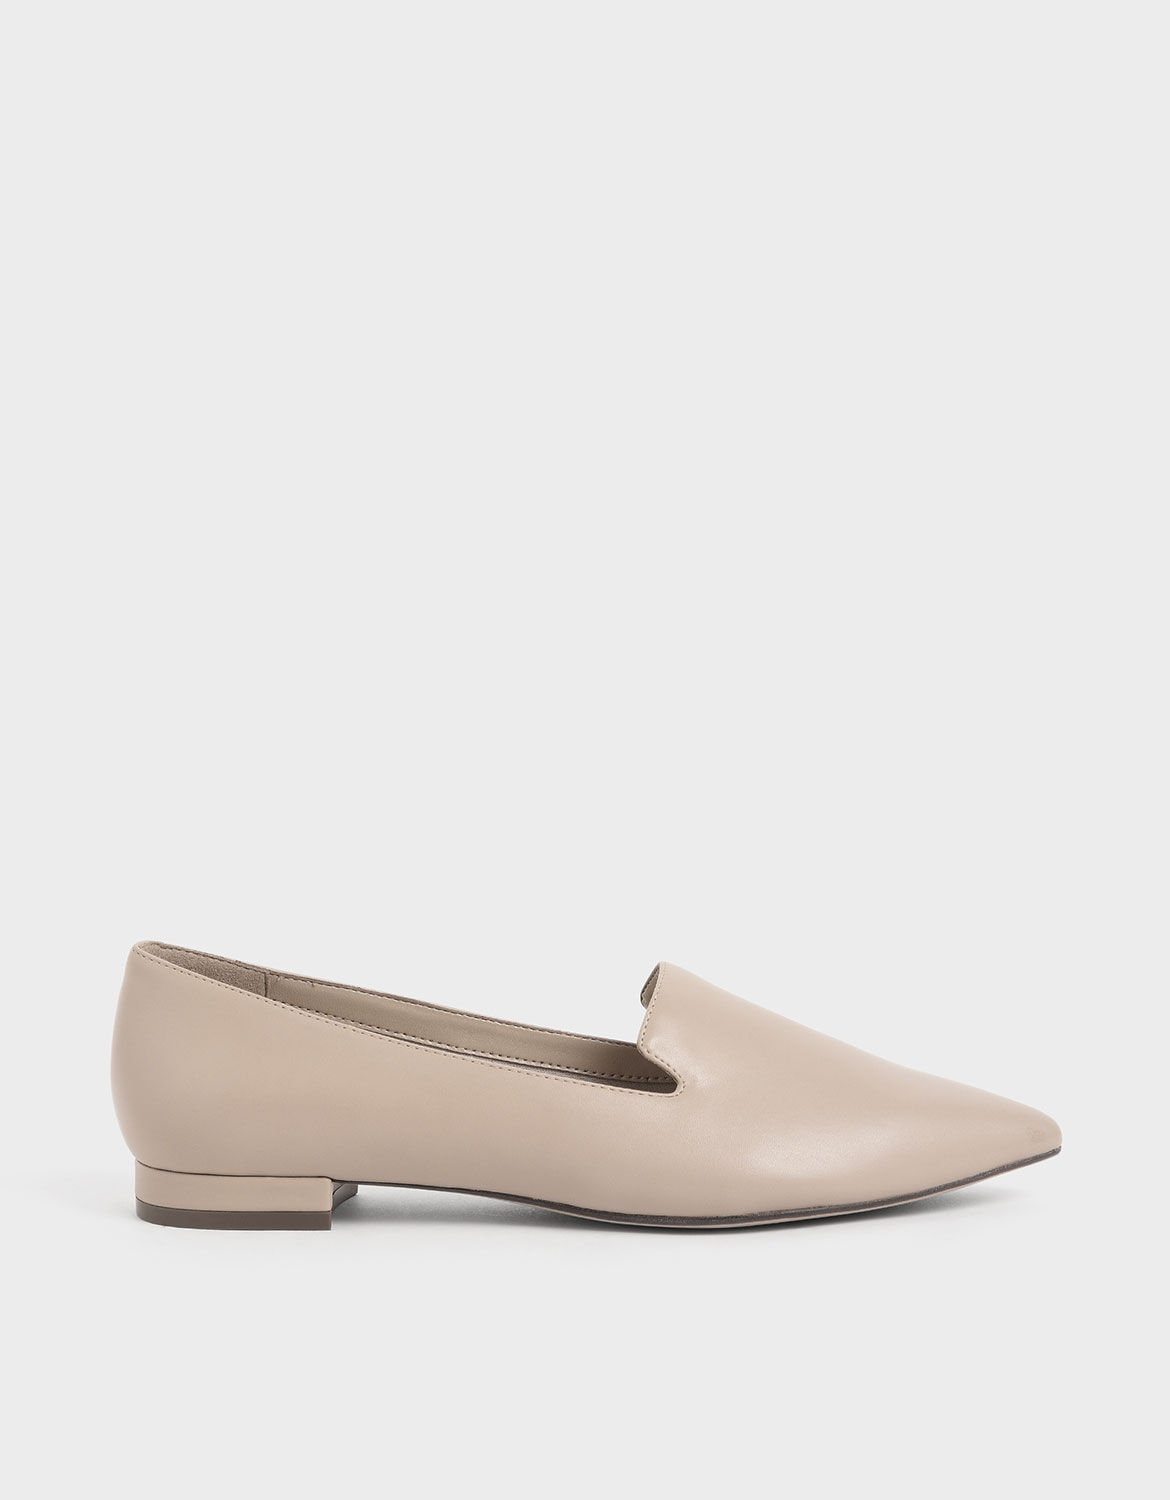 Textured Pointed Toe Loafer Flats